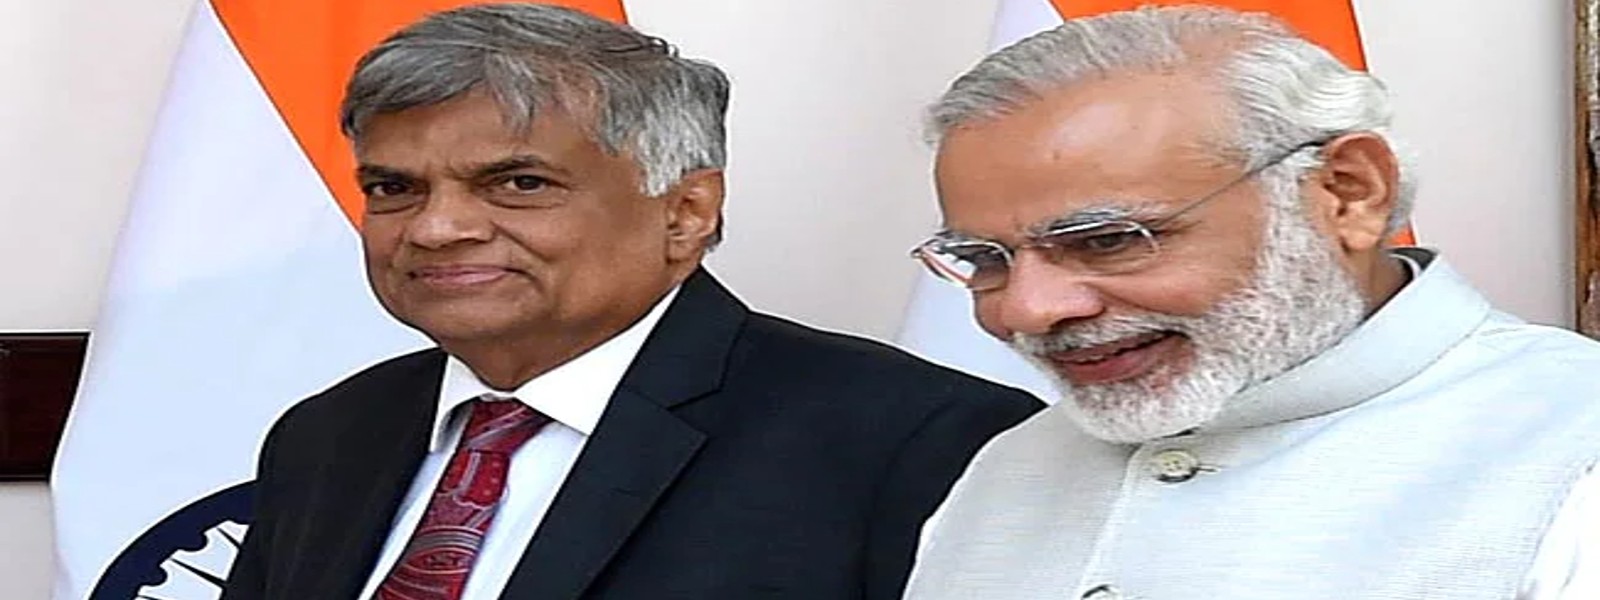 India will support Sri Lanka for stability through democratic means